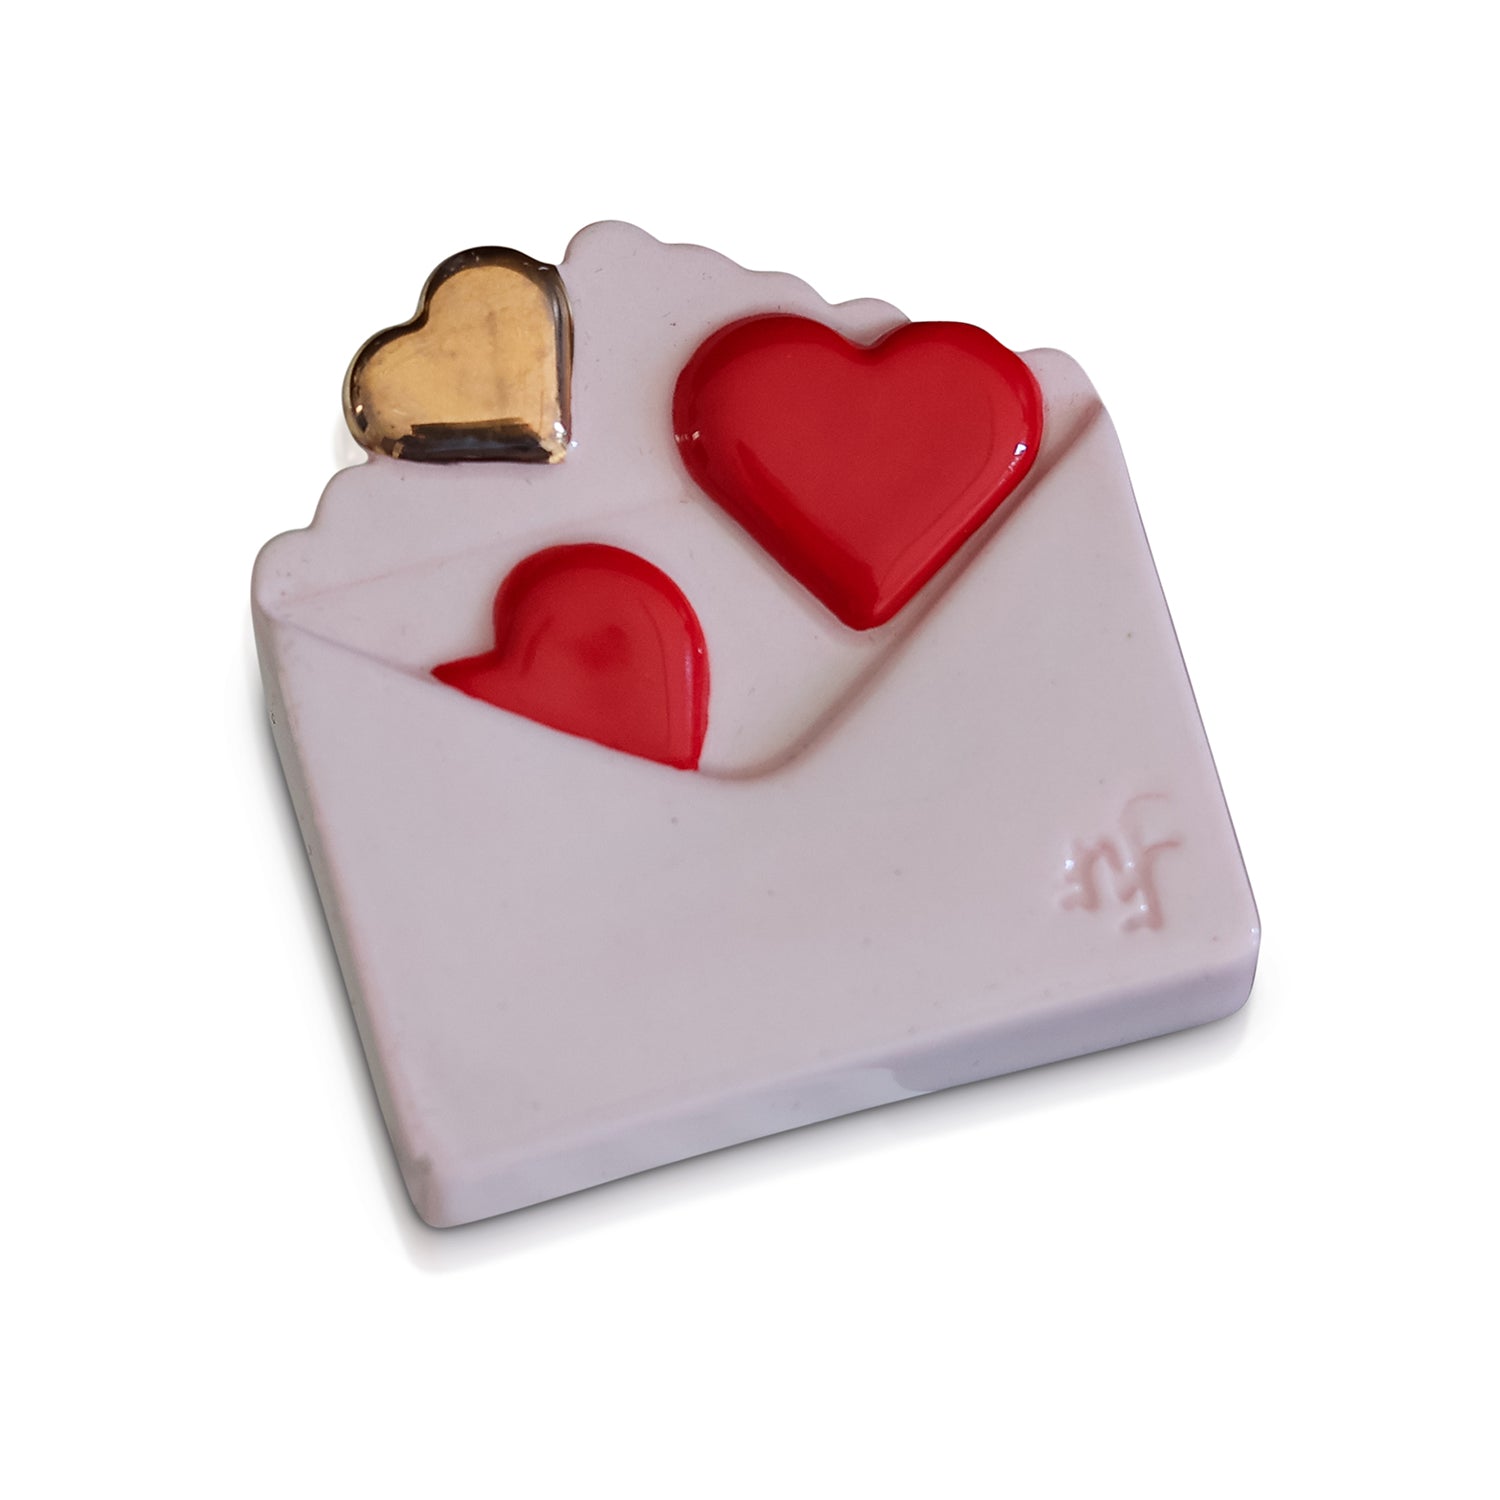 I Love Skylar - With Simple Love Heart Greeting Card for Sale by